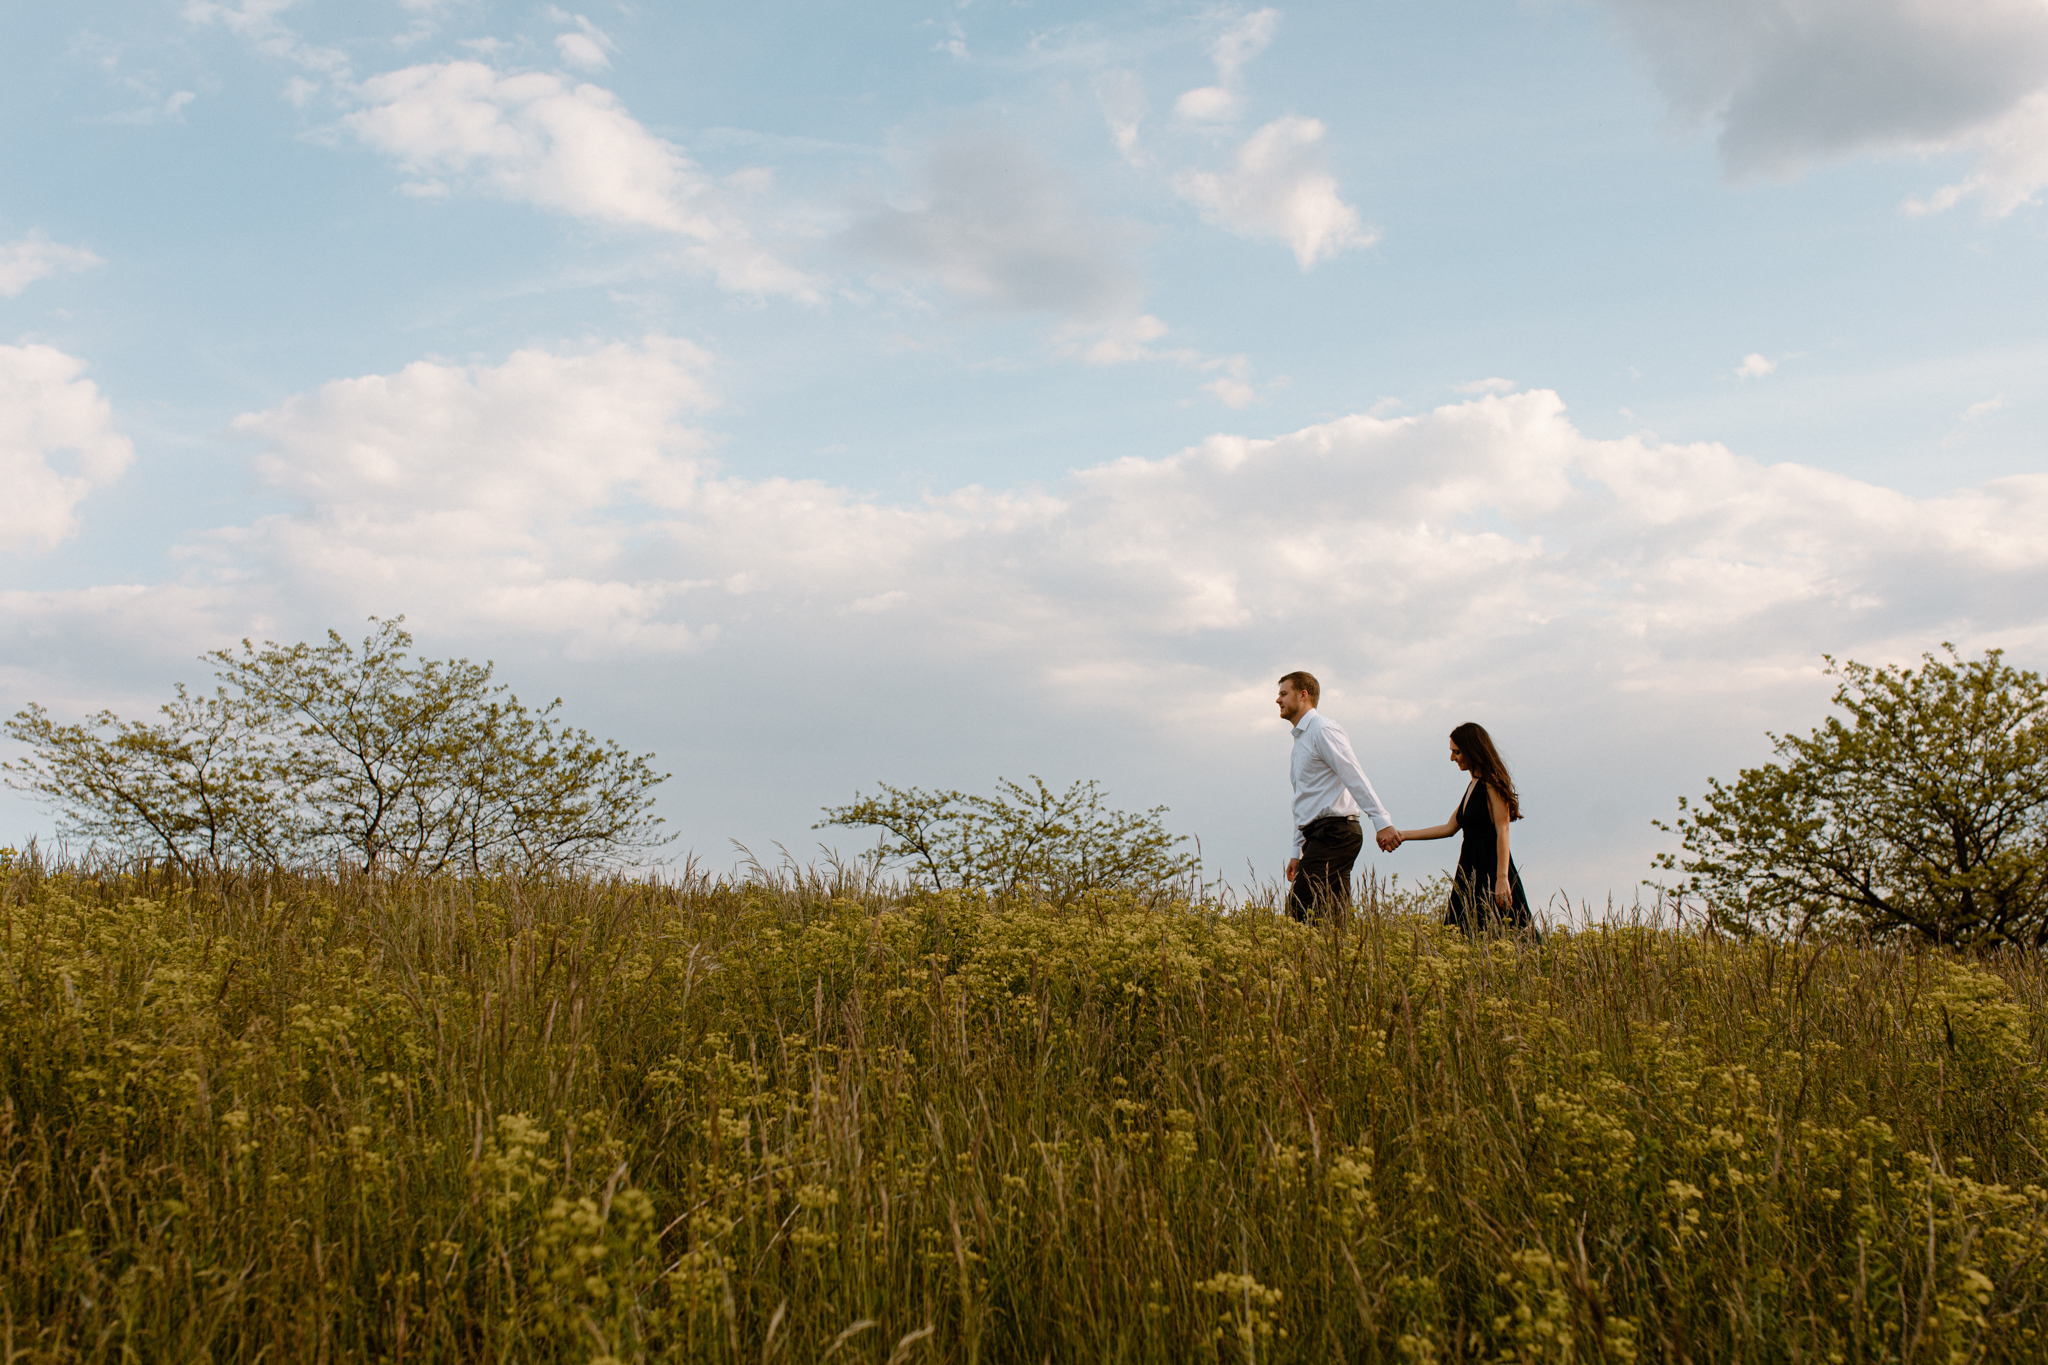 people holding hands, walking through a field